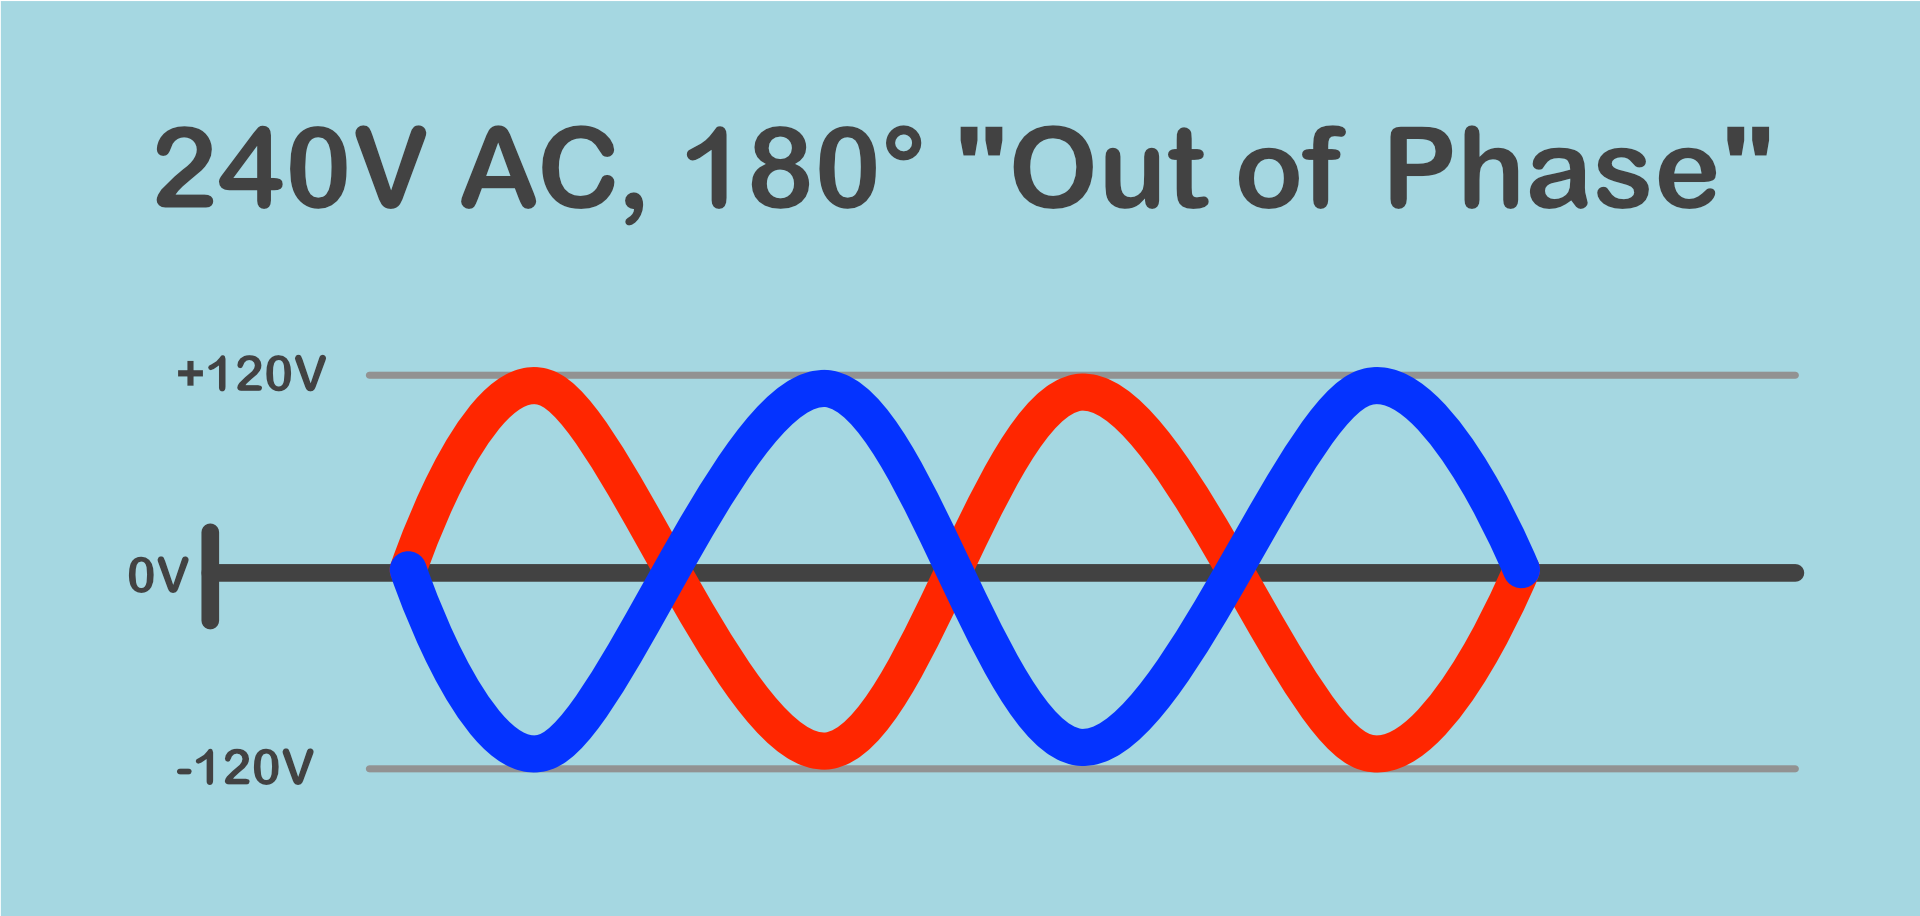 Graph of two legs of 120V AC power 180-degrees out of phase